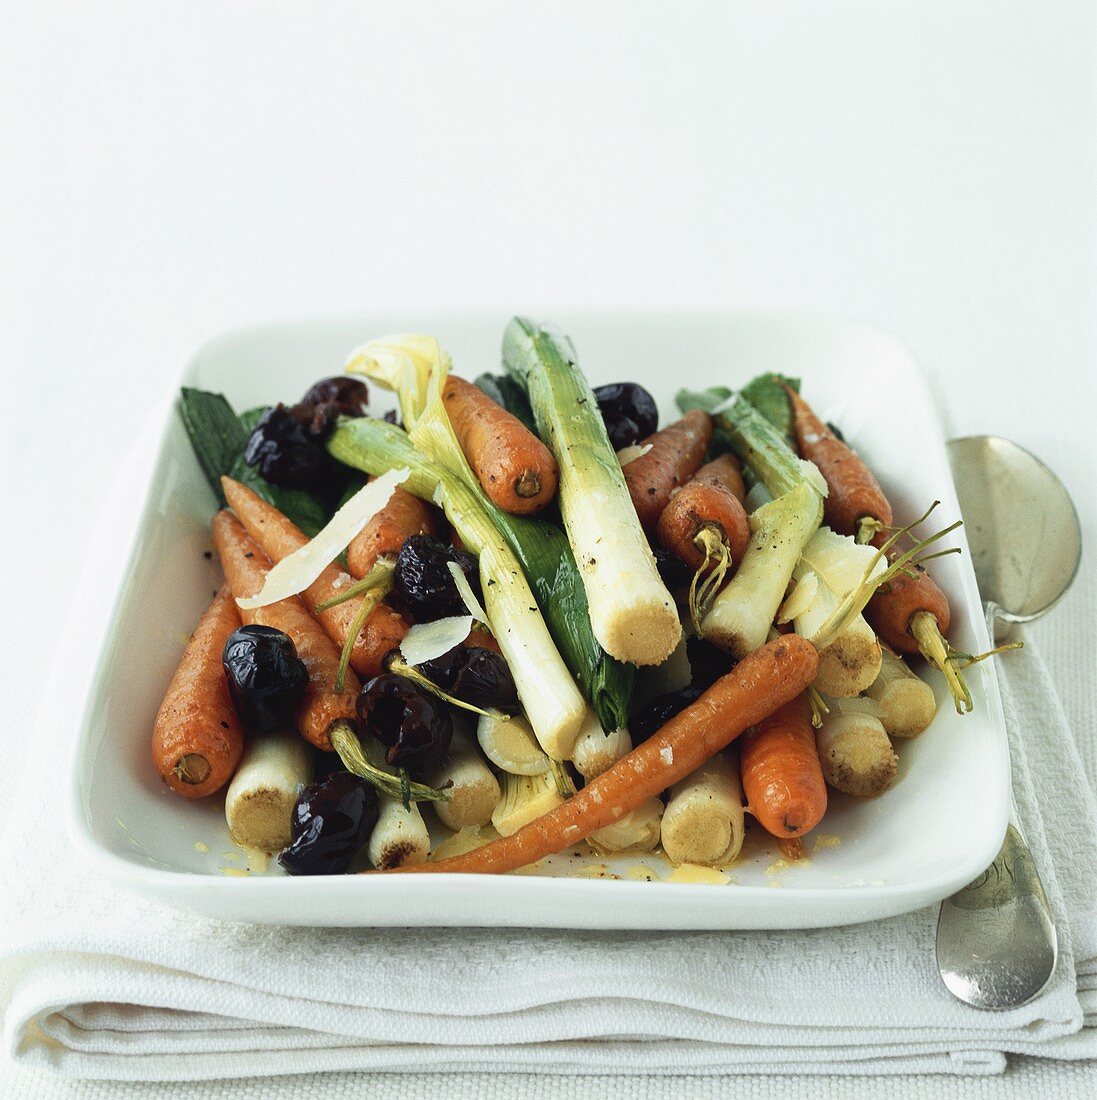 Roasted vegetables (leeks, carrots, olives) with cheese shavings